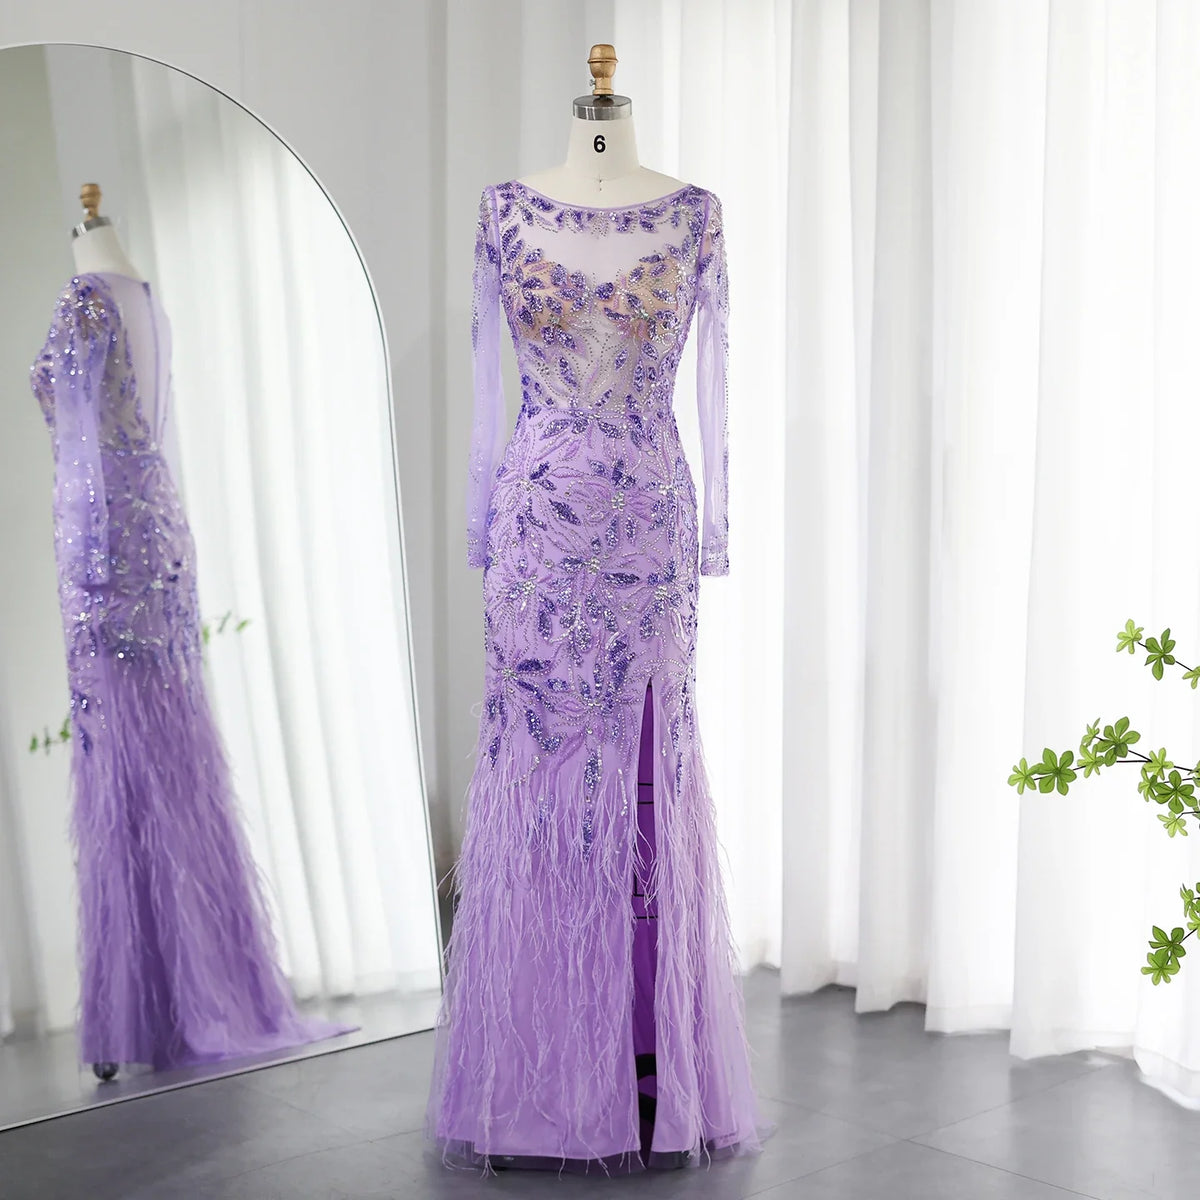 Sharon Said Dubai Lilac Luxury Feathers Evening Dresses for Women Wedding Elegant Long Sleeves Mermaid Prom Party Gowns SS189